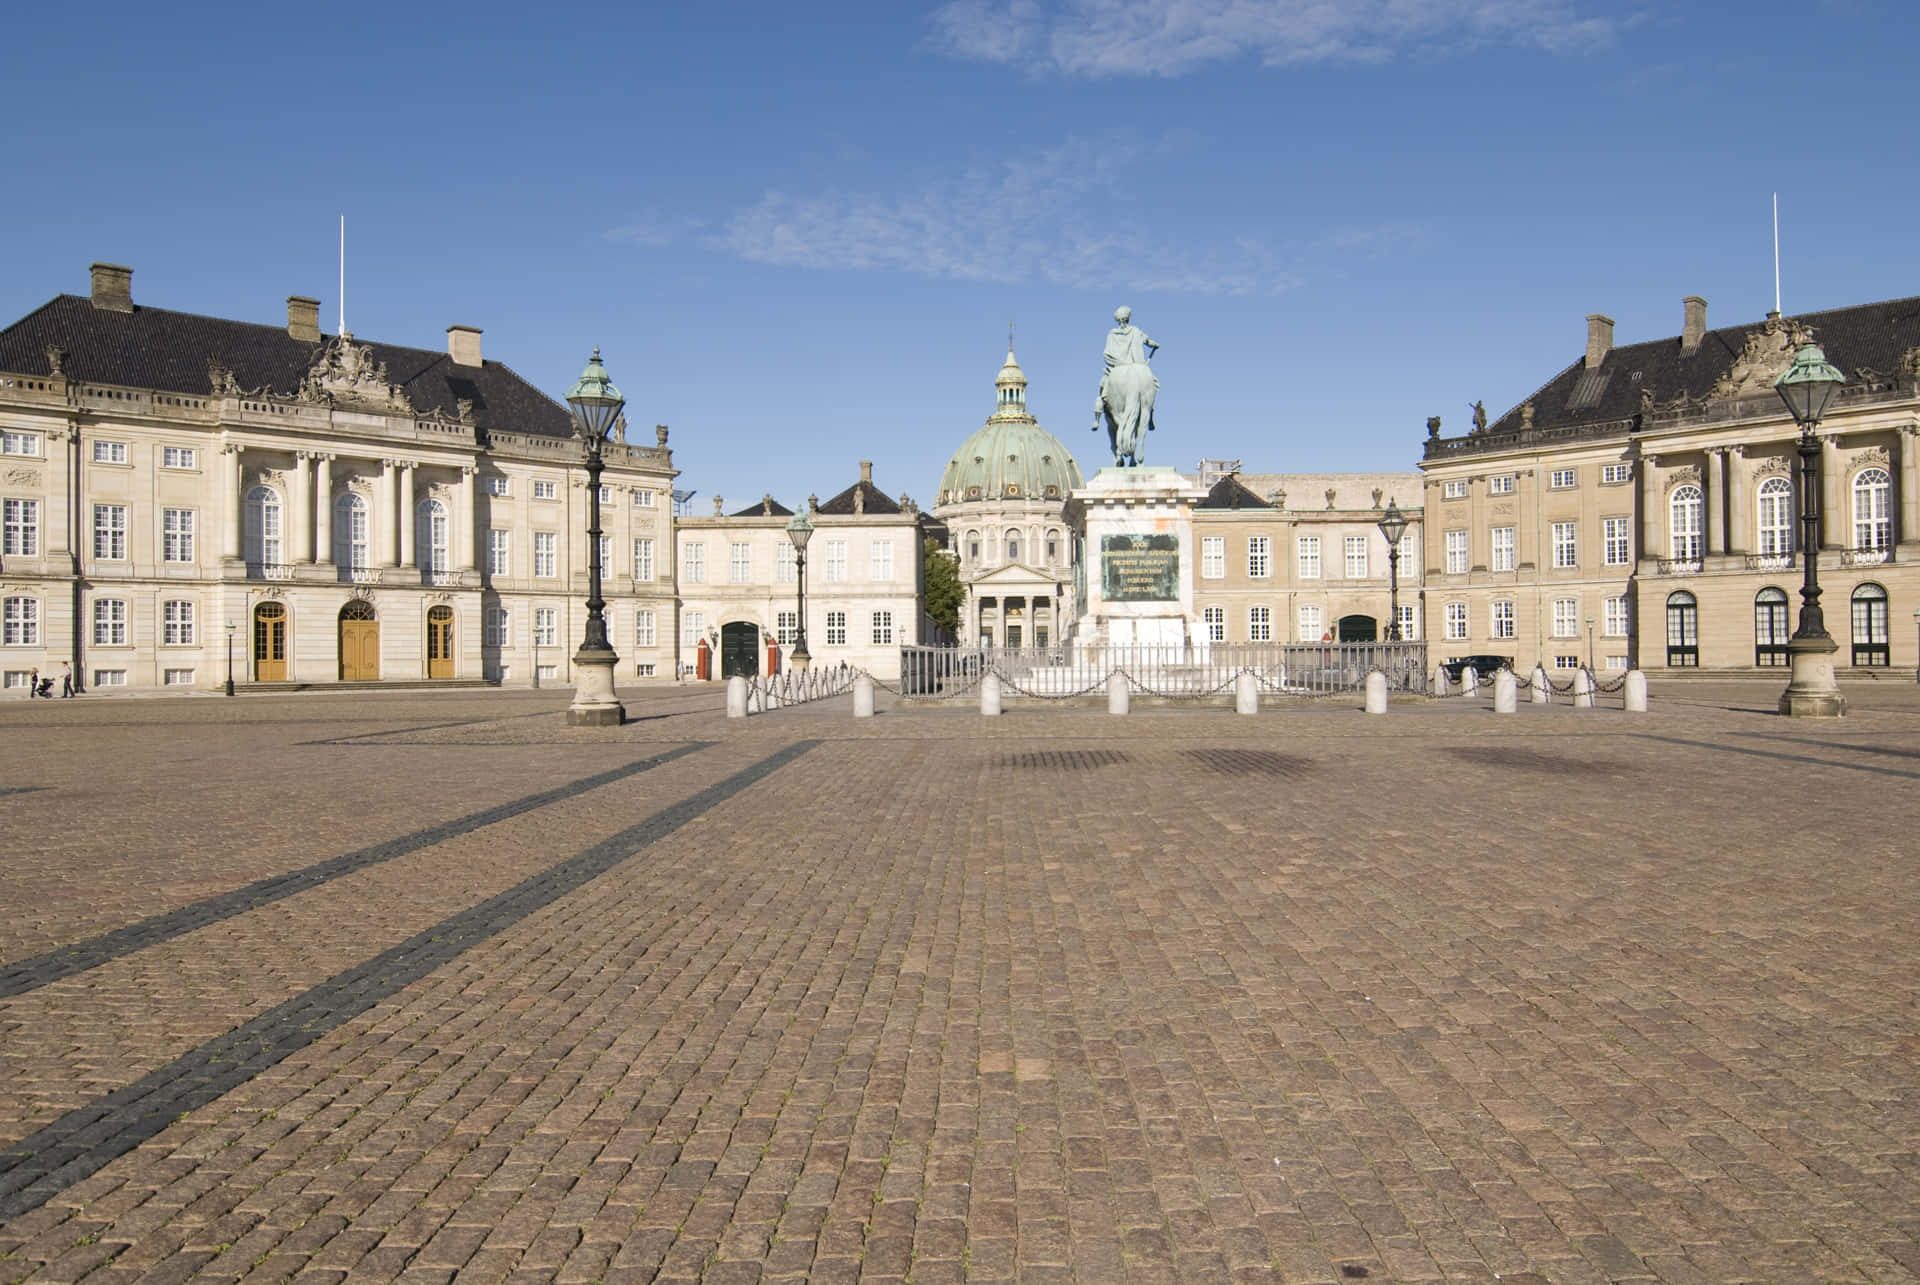 Structures In Amalienborg Palace Wallpaper